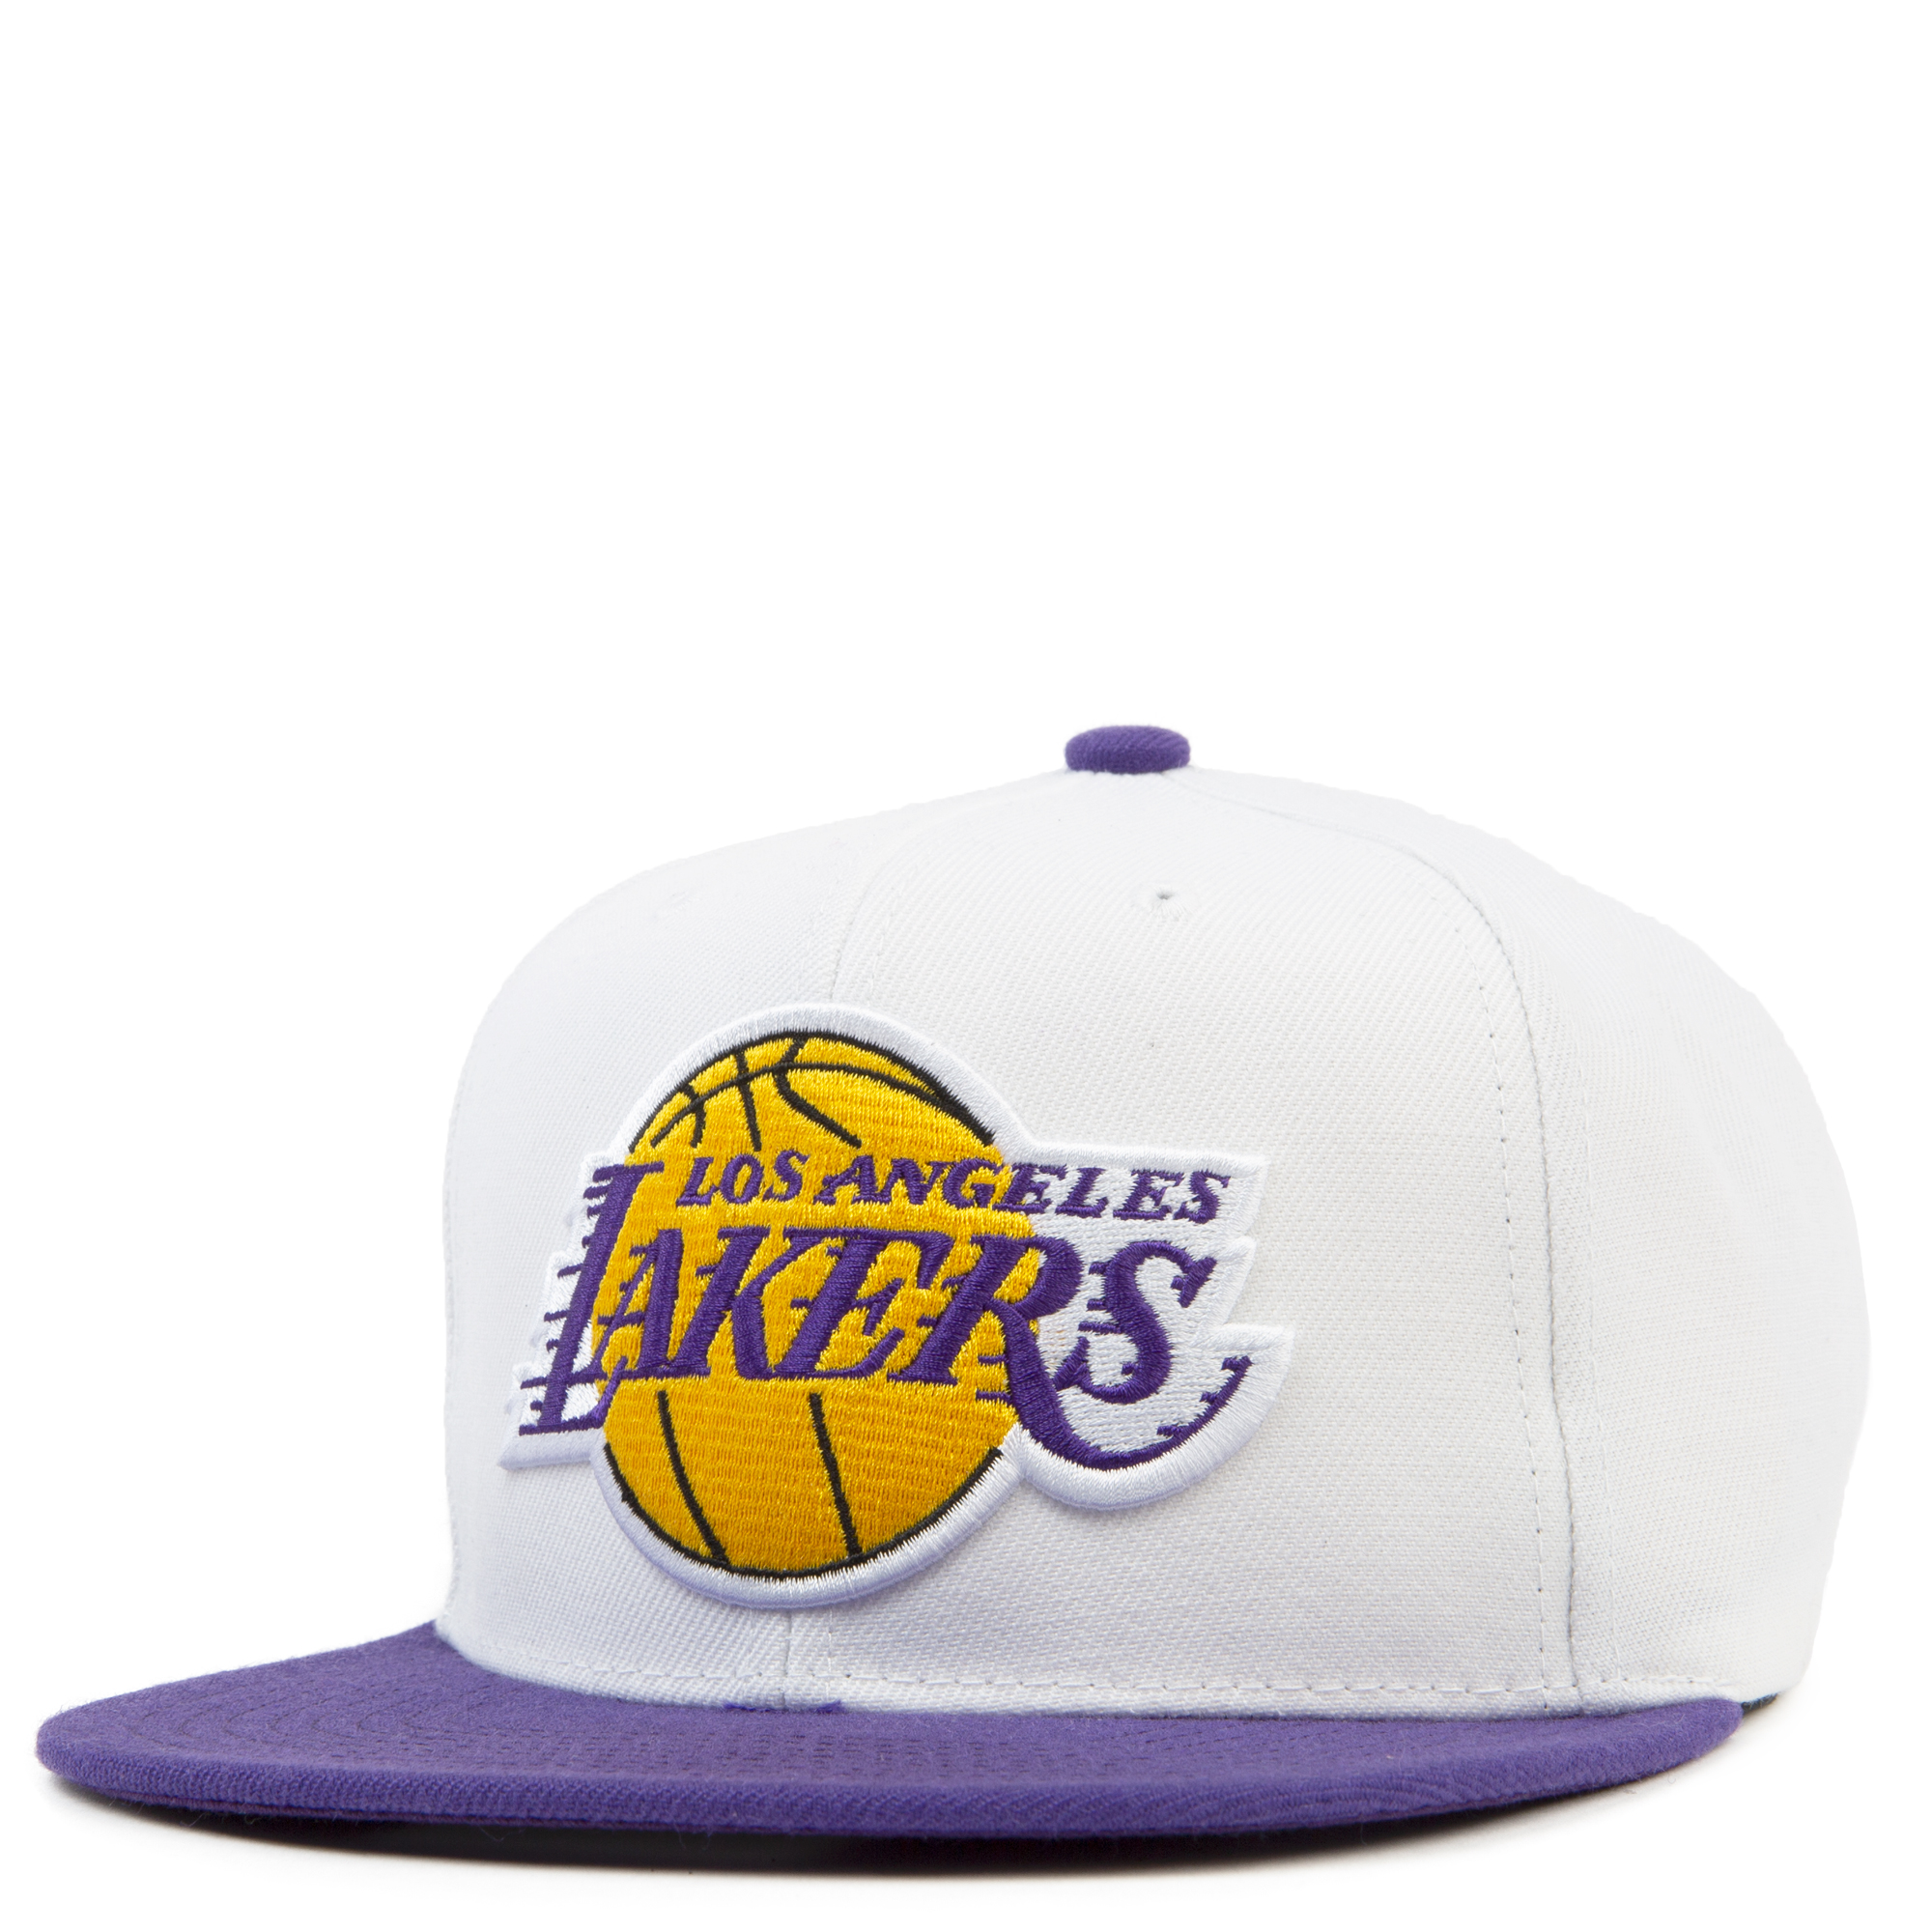 MITCHELL AND NESS Los Angeles Lakers Fresh Crown Snapback  6HSSMM19007-LALWHPR - Shiekh